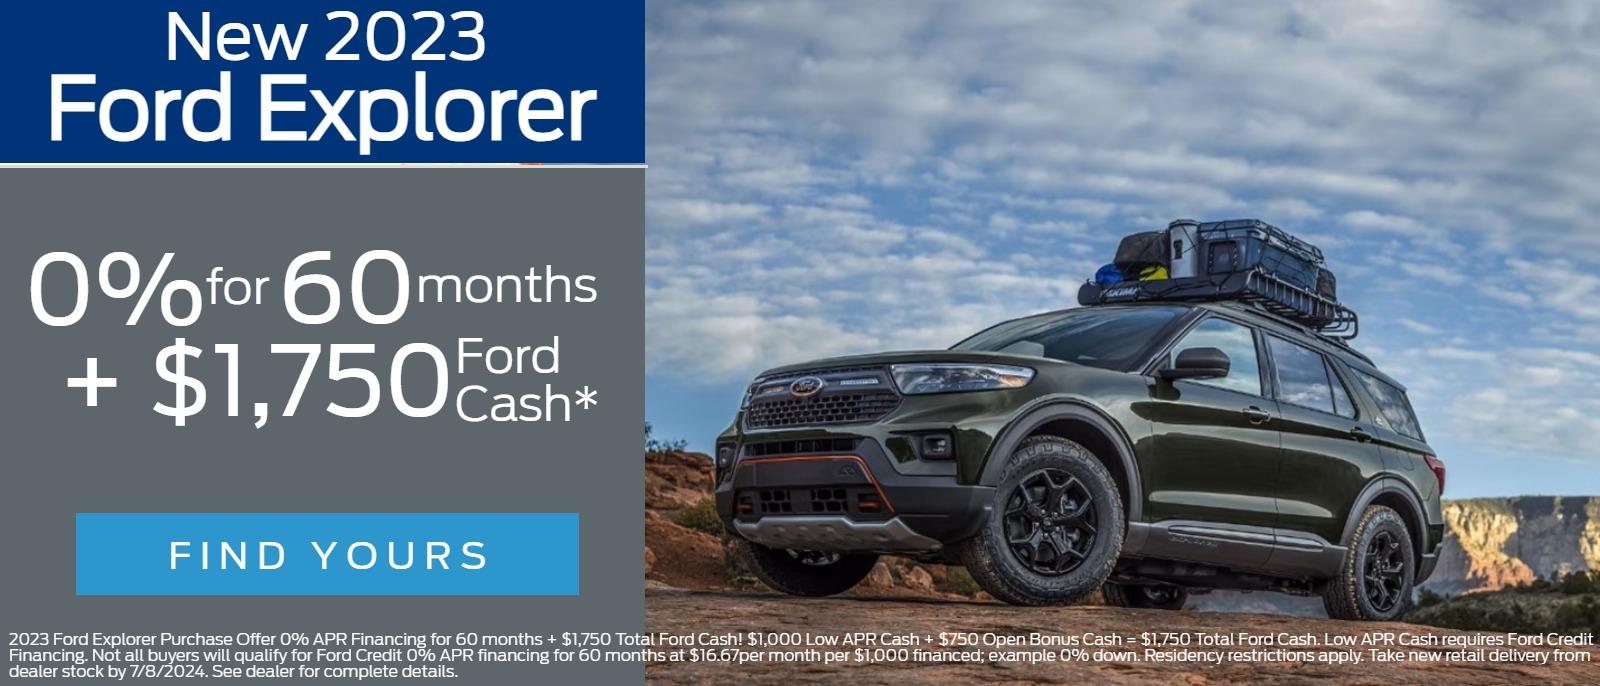 New 2023 
Ford Explorer
 0% for 60 months  + 
$1,750  Ford Cash*

2023 Ford Explorer Purchase Offer 0% APR Financing for 60 months + $1,750 Total Ford Cash! $1,000 Low APR Cash + $750 Open Bonus Cash = $1,750 Total Ford Cash. Low APR Cash requires Ford Credit Financing. Not all buyers will qualify for Ford Credit 0% APR financing for 60 months at $16.67per month per $1,000 financed; example 0% down. Residency restrictions apply. Take new retail delivery from dealer stock by 7/8/2024. See dealer for complete details.